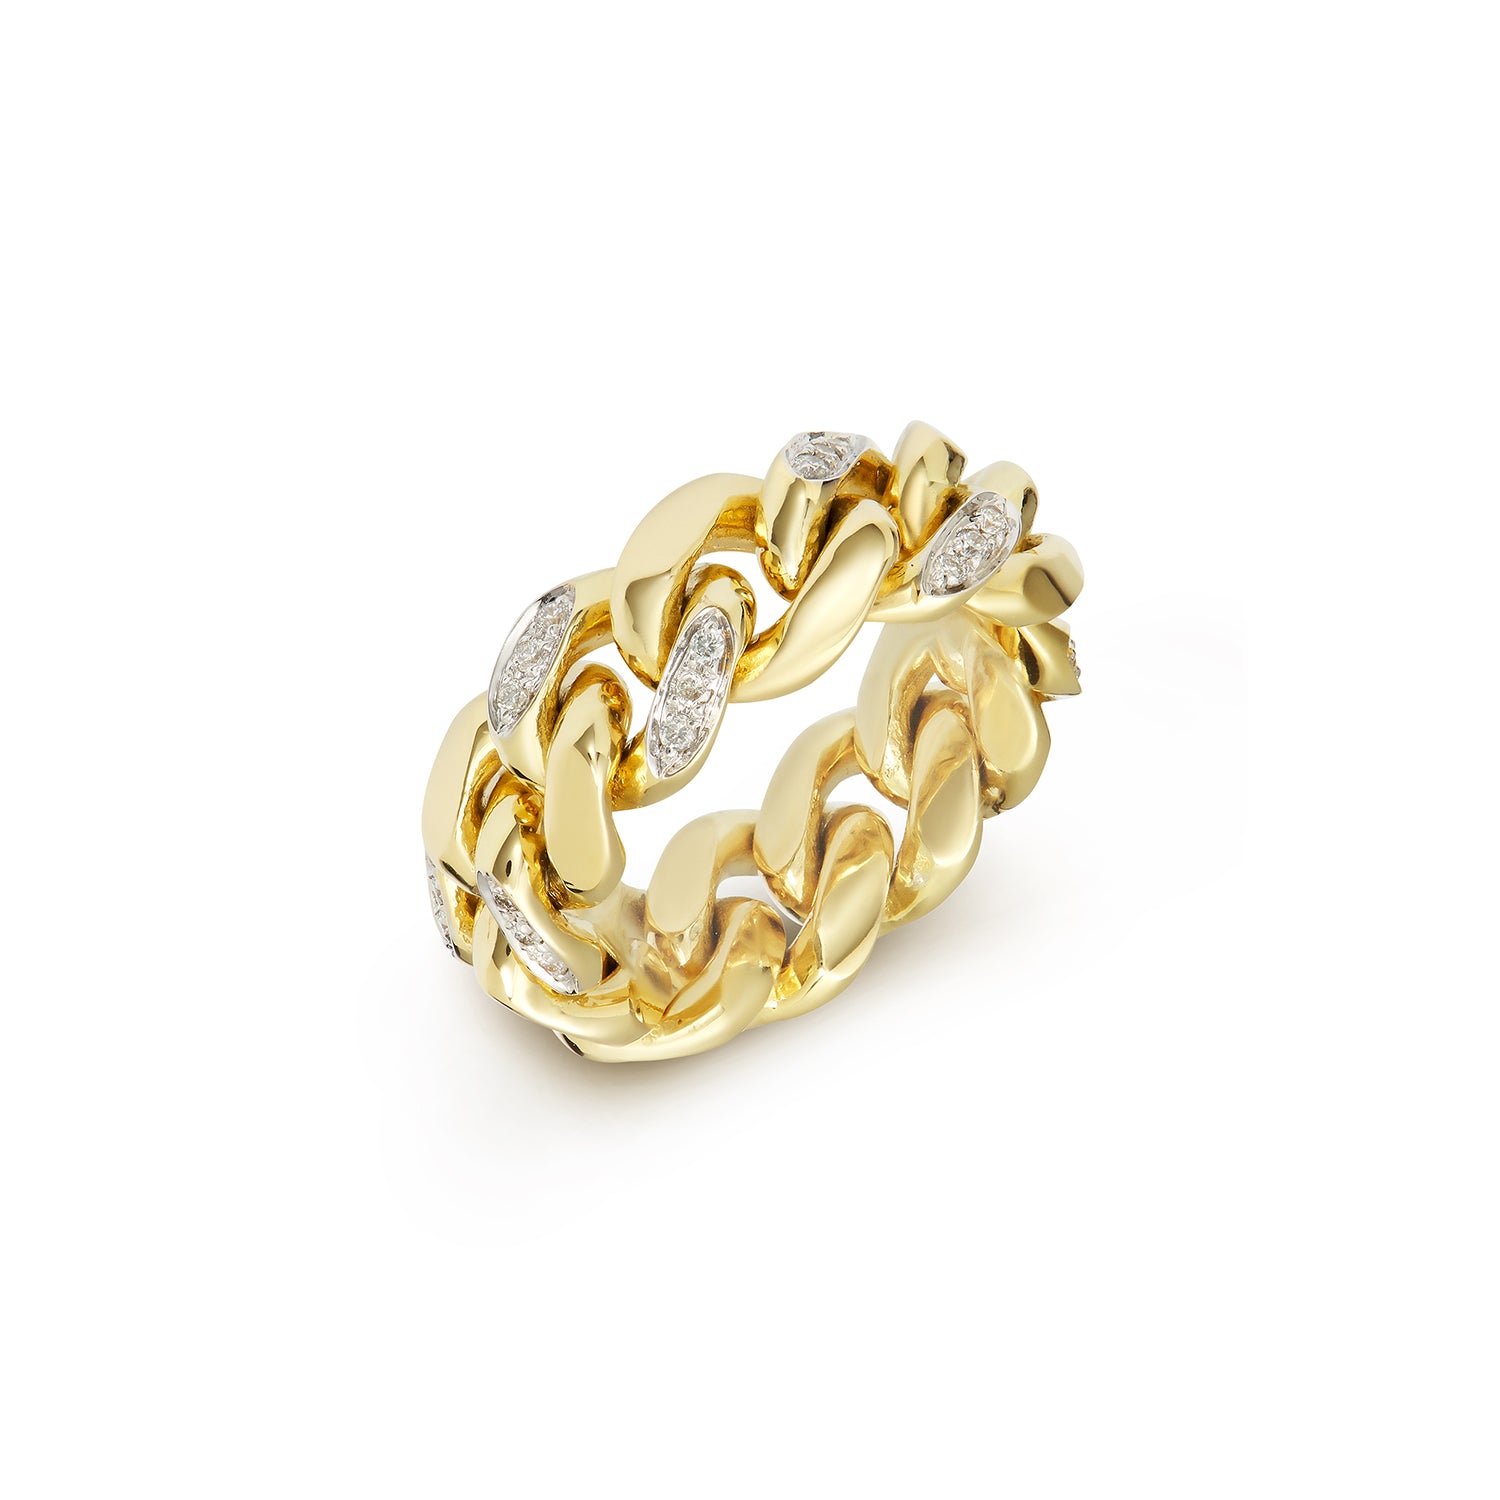 Blink flexible ring with chain and diamonds